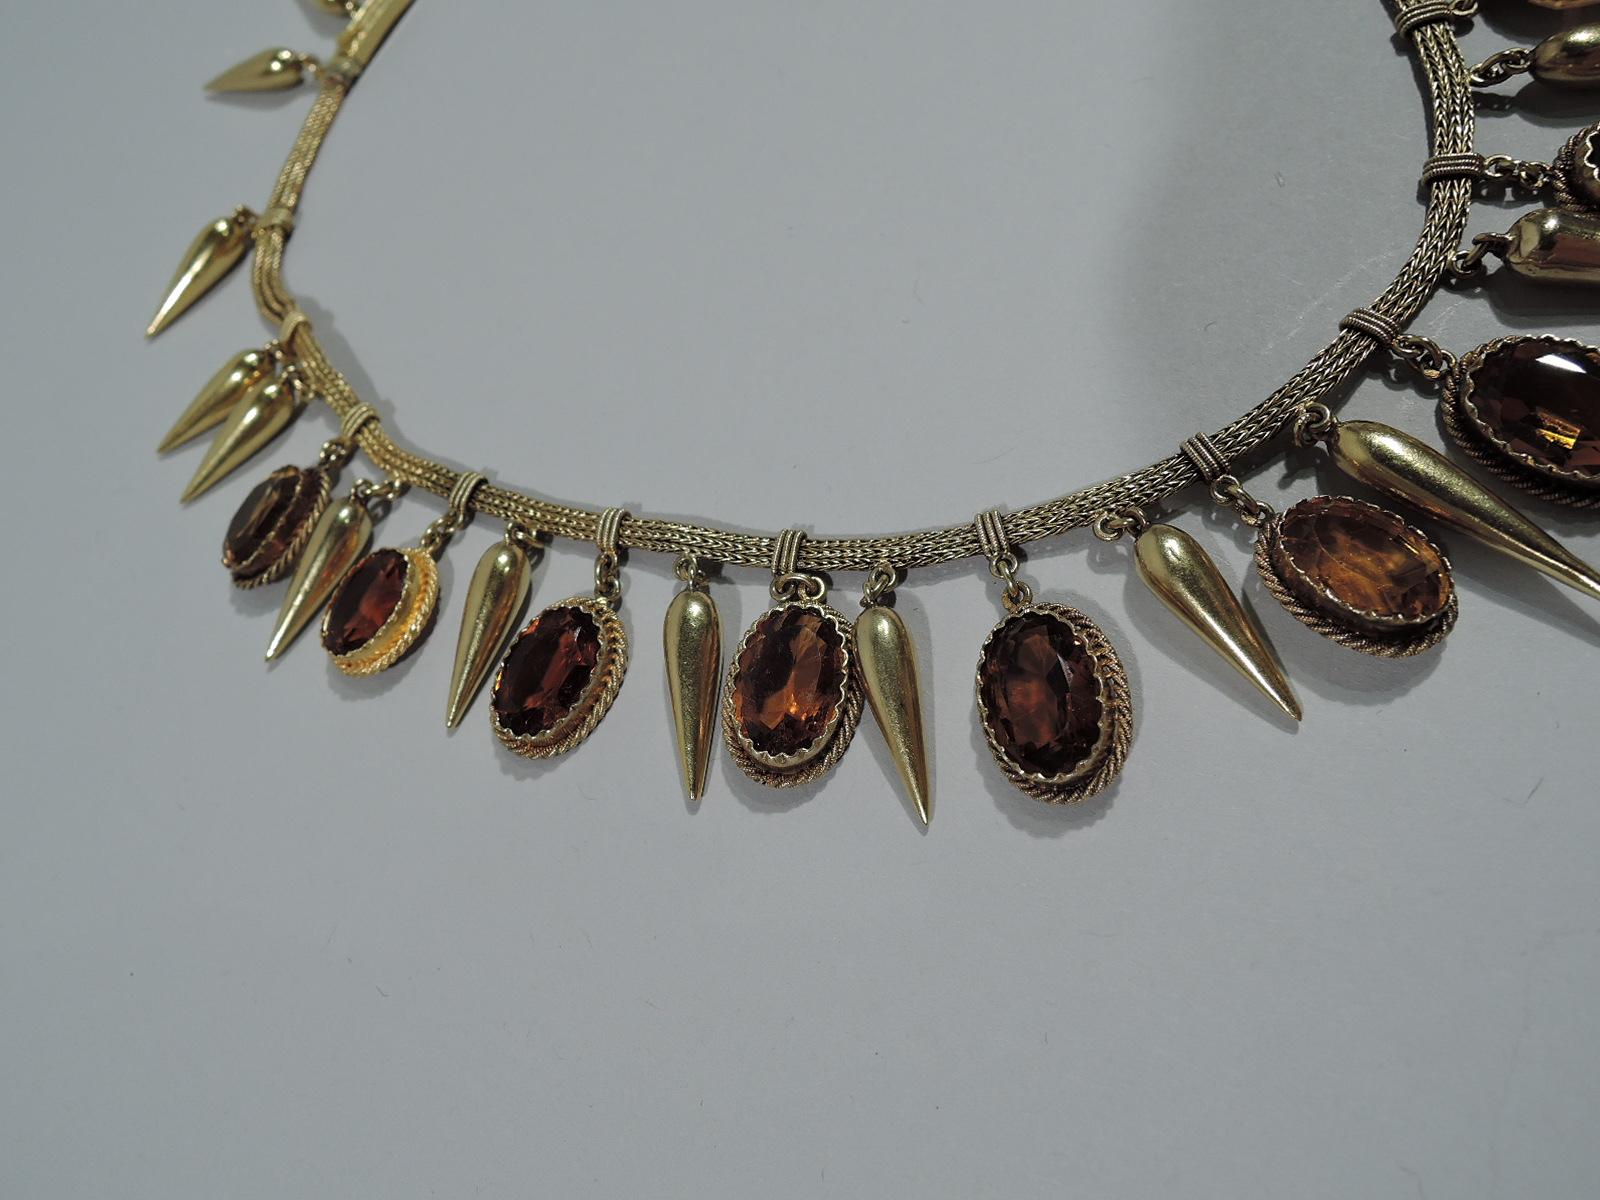 Etruscan Revival 18K gold and citrine necklace, ca 1870. Fringe-style with egg-and-dart pendants in form of alternating collet-set citrines and gold. A beautiful example of the archaeological vogue. Signed MB in lozenge and French hallmark on clasp